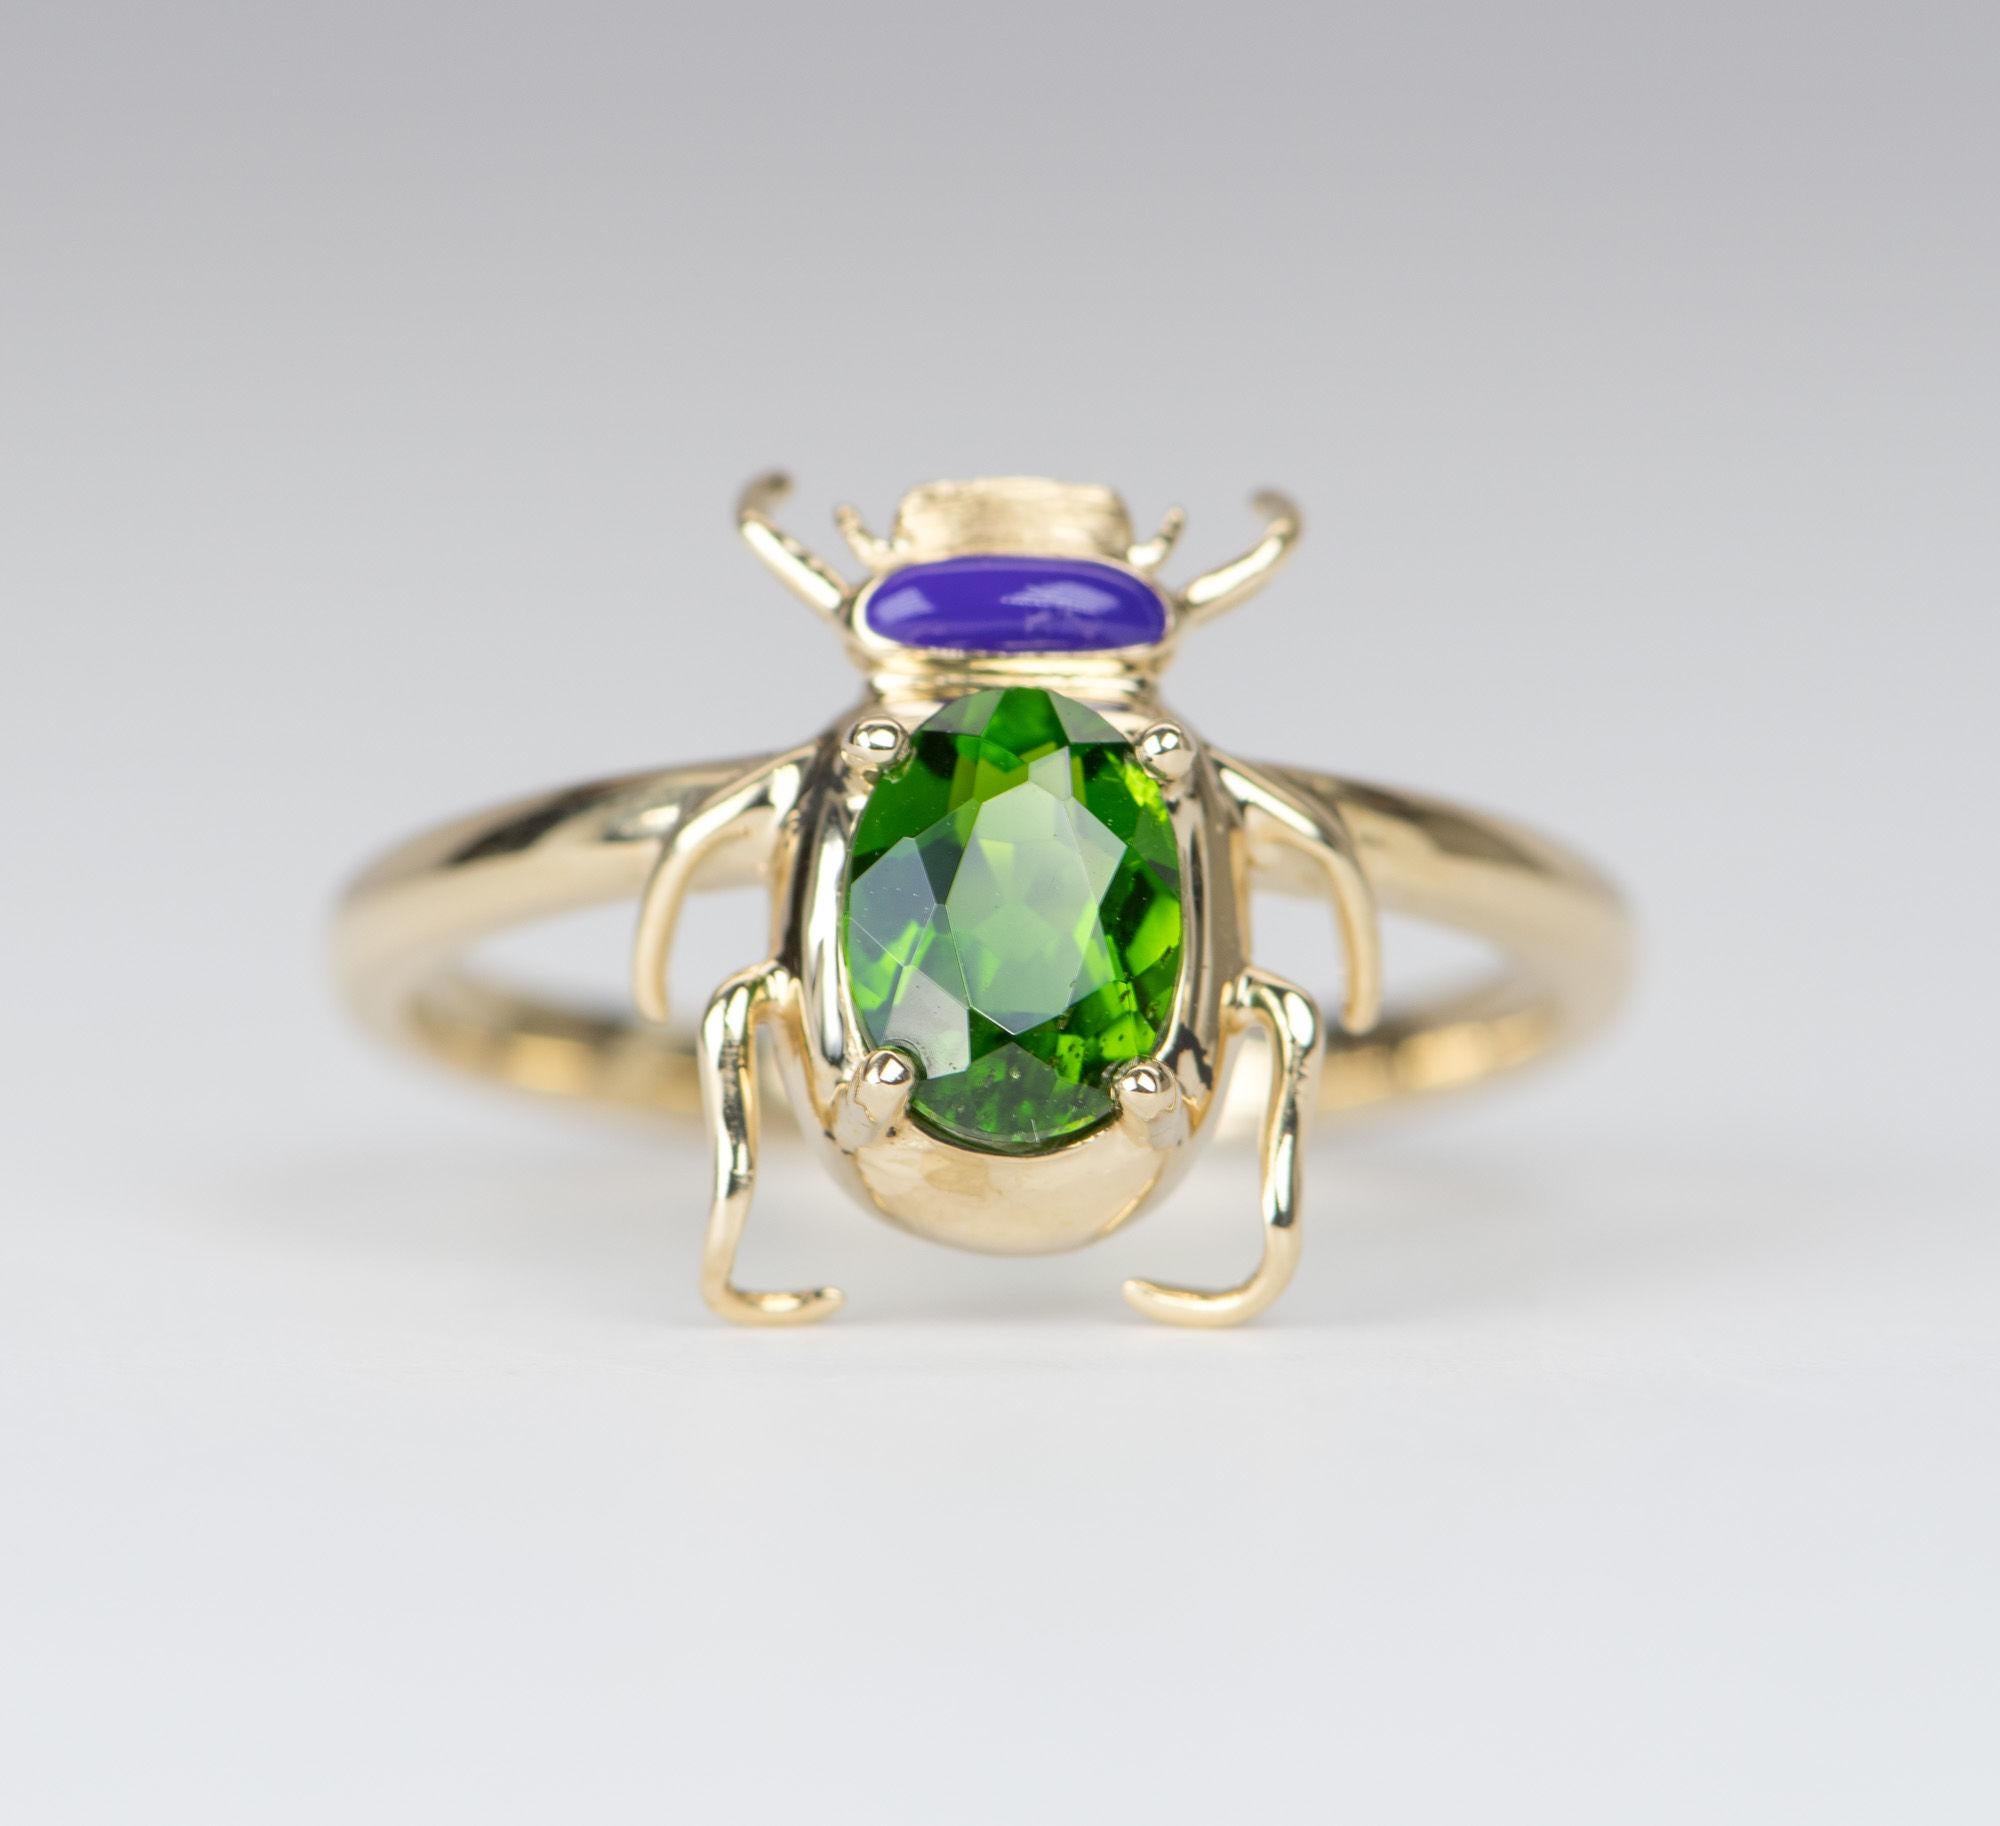 ♥ Bright Green Tourmaline 14K Yellow Gold Beetle Ring with Purple Enamel Head
♥ Solid 14k yellow gold ring set with a beautiful oval-shaped tourmaline
♥ Gorgeous green color!
♥ The item measures 13.02 mm in length, 11.8 mm in width, and stands 4.6